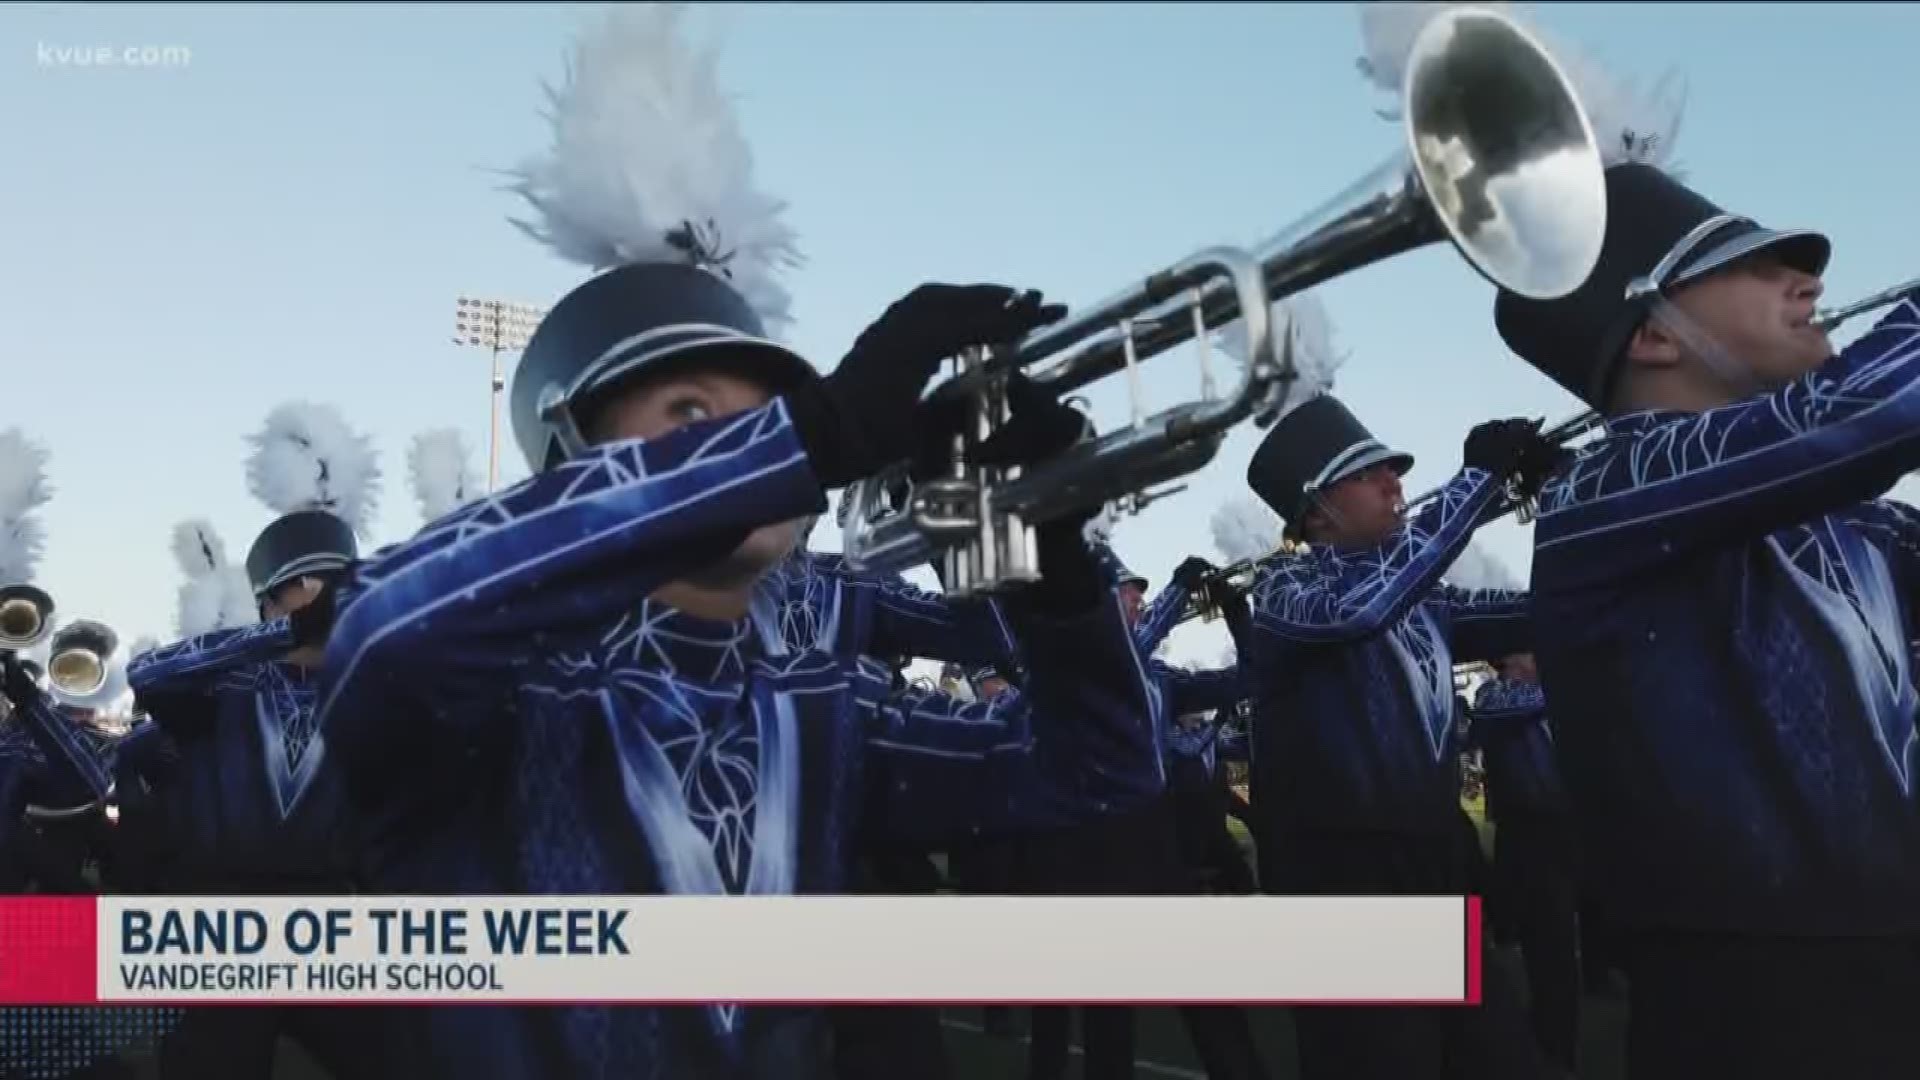 KVUE's Friday Football Fever Band of the Week for our Nov. 22 show goes to Vandegrift High School!